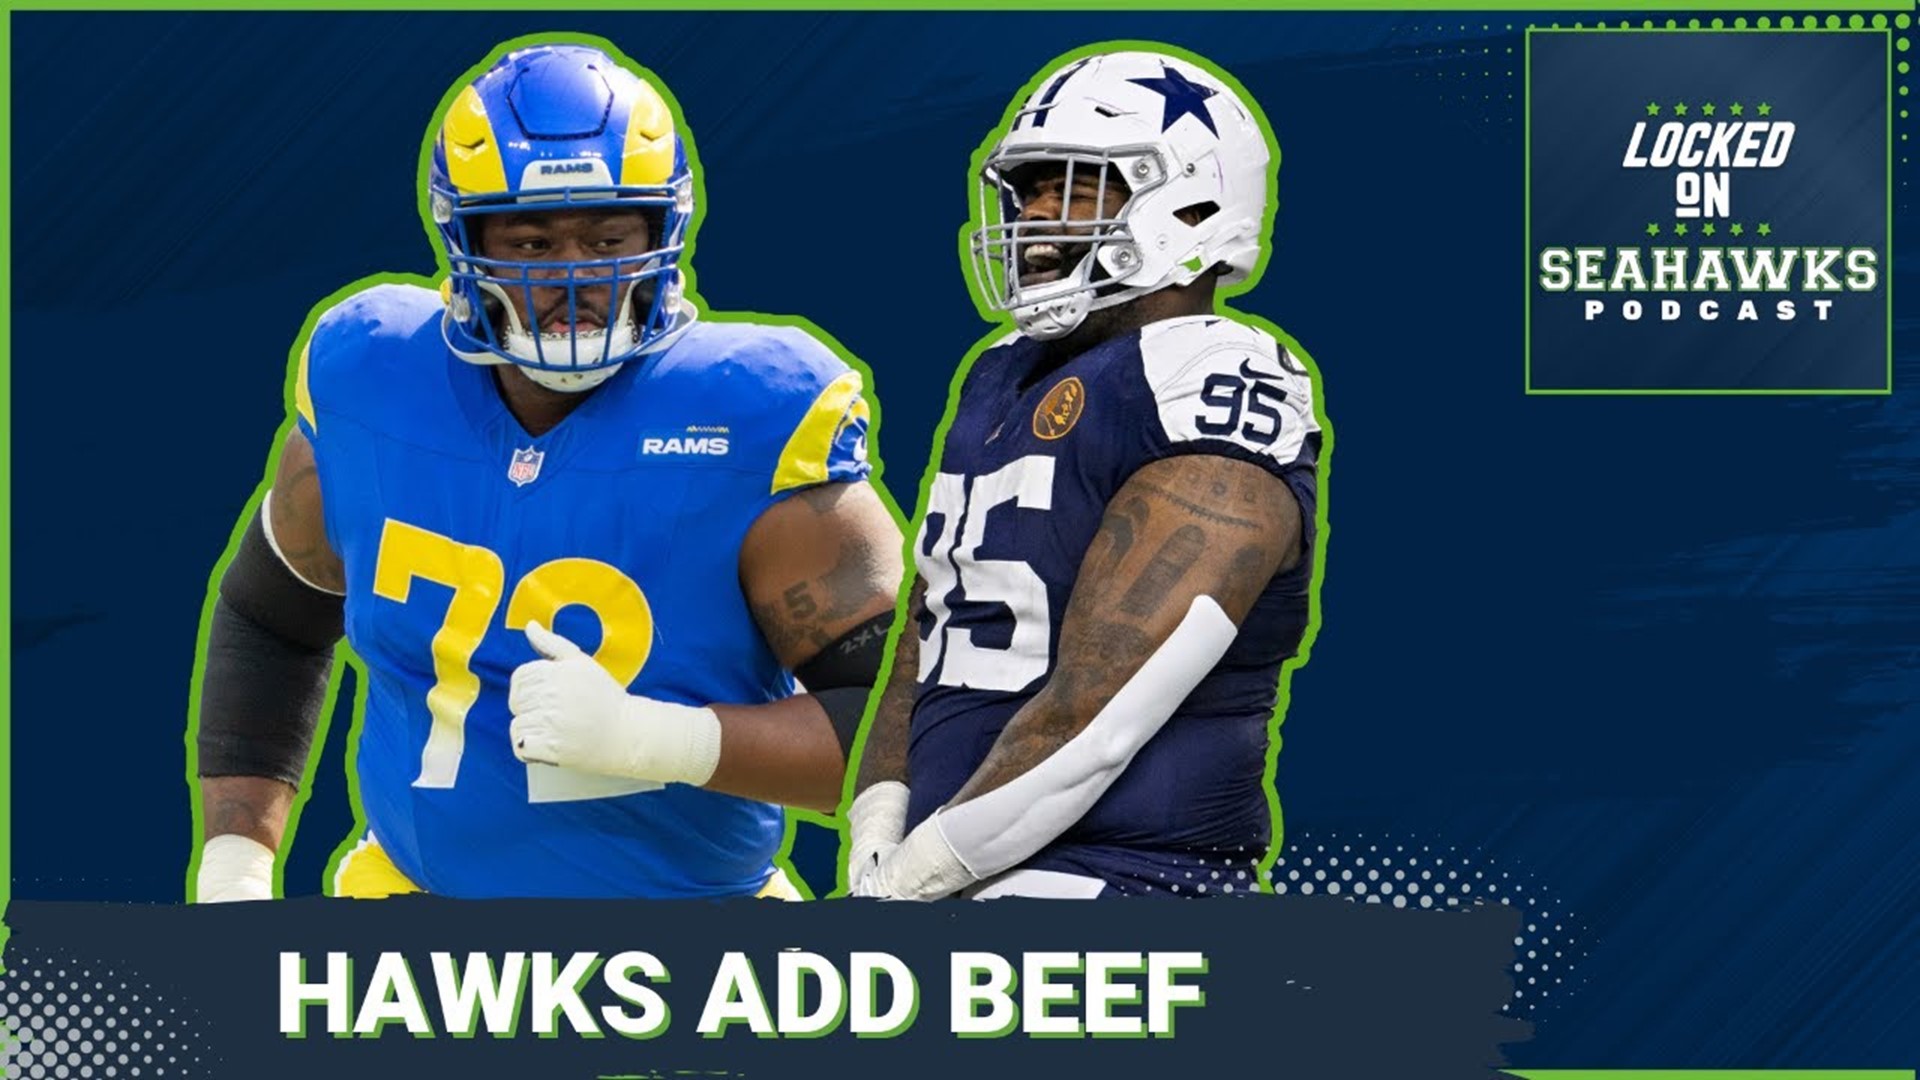 After losing Damien Lewis and releasing Bryan Mone early in free agency, the Seahawks made a pair of moves to bolster their front lines